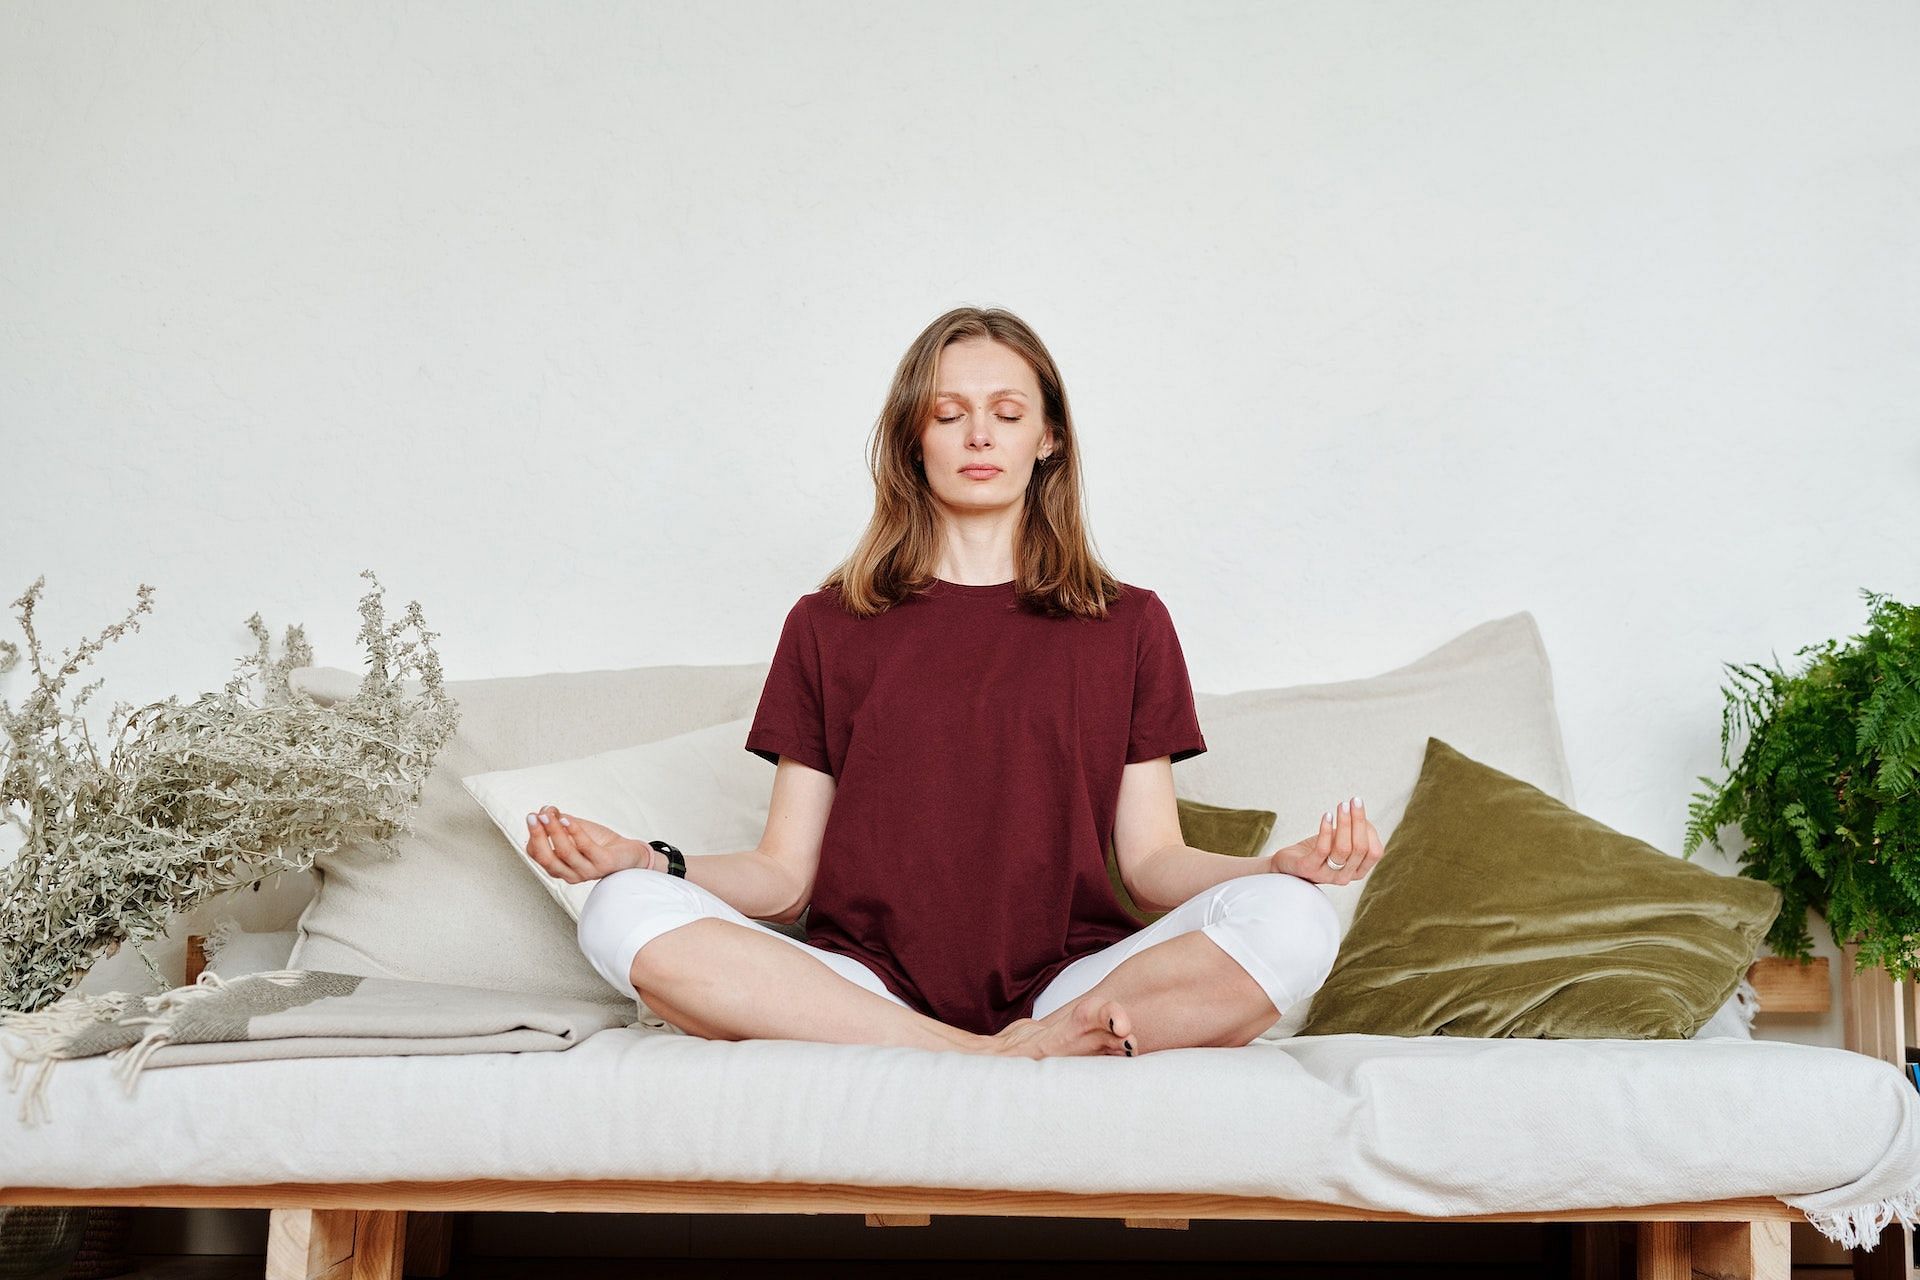 Meditation and other stress-relieving methods can help. (Photo via Pexels/Mikael Blomkvist)